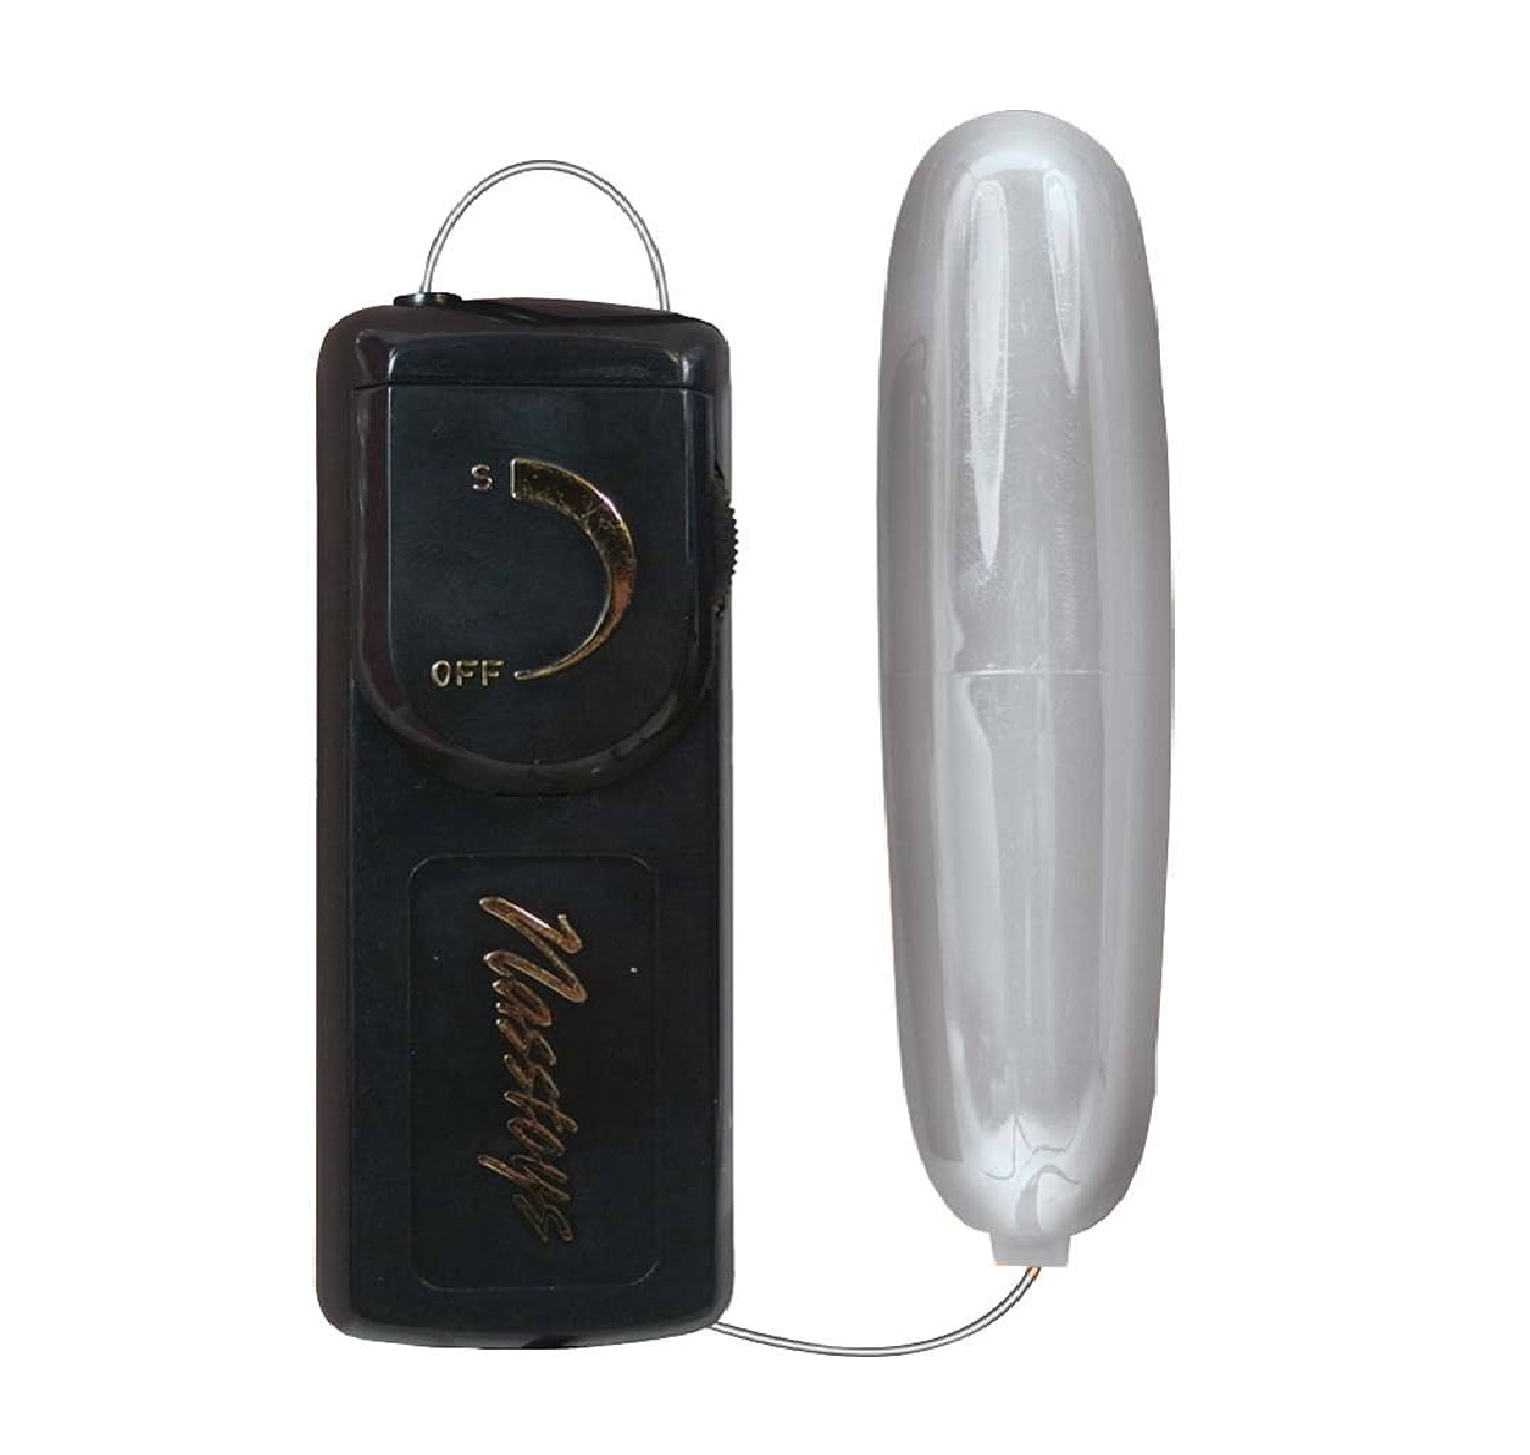 Ultra Bullet Vibrator with Controller in Sleek Silver